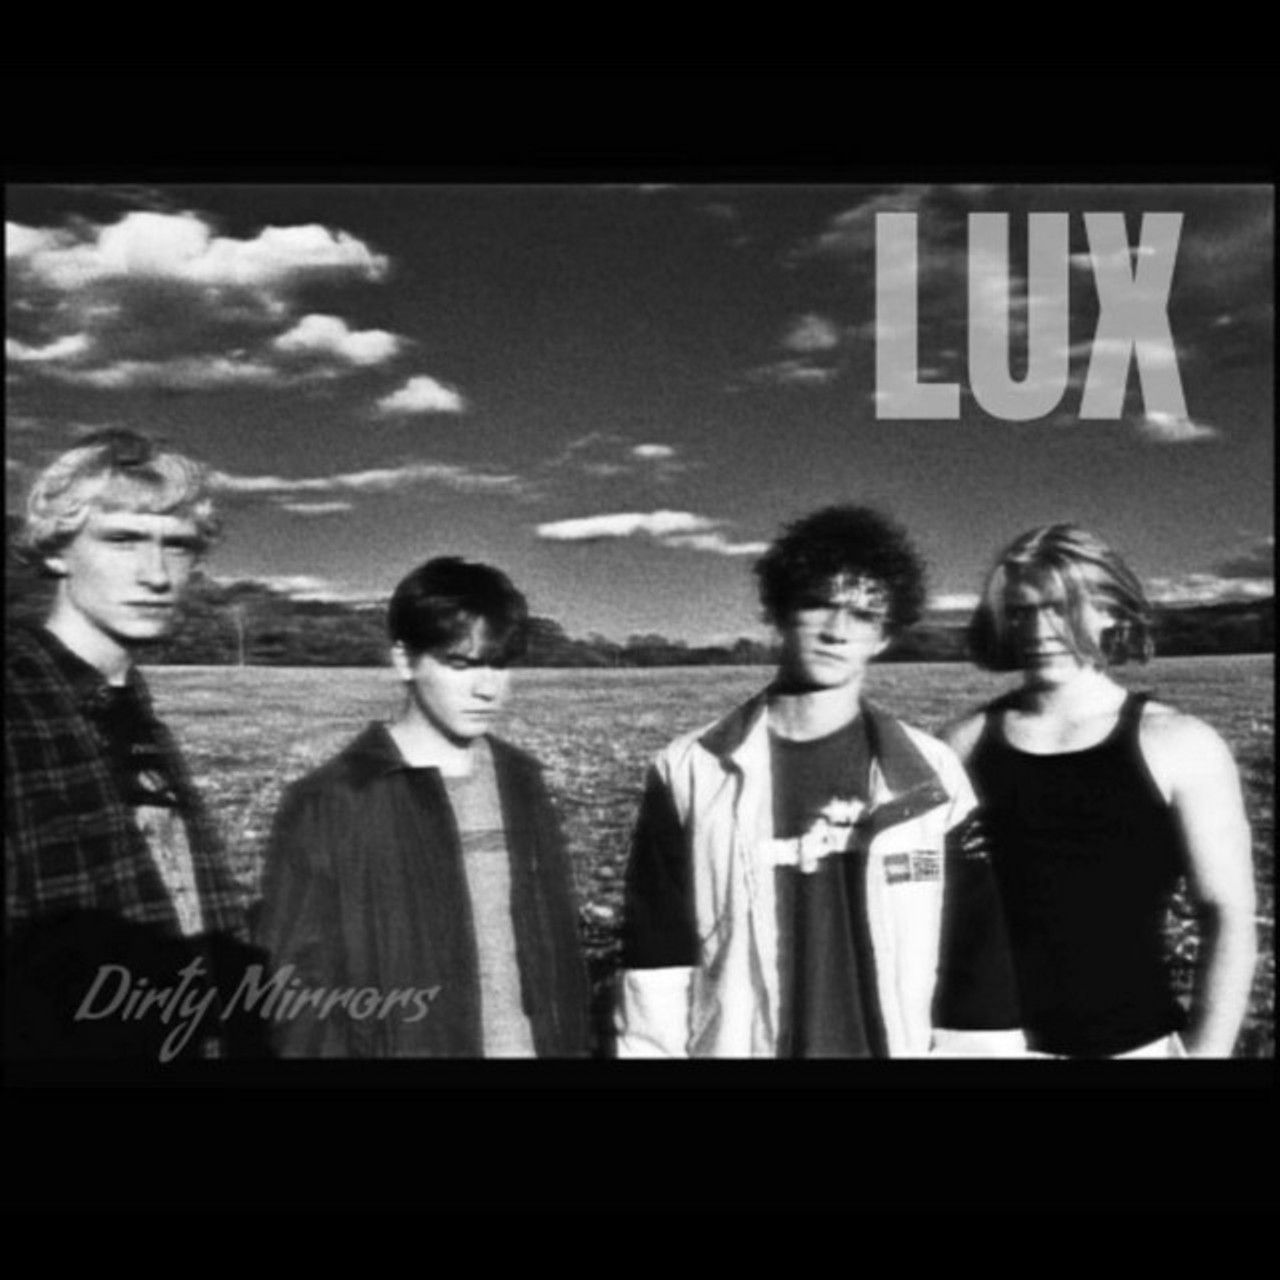  LUX &#151; &#147;We Toss Suns&#148; 
If you haven&#146;t given LUX a listen yet, do so now. I&#146;ll wait. &#147;We Toss Suns,&#148; the first track off their debut EP Dirty Mirrors, is a great place to start. Equal parts shoegaze, indie rock and post-hardcore, &#147;We Toss Suns&#148; manages to combine high-energy guitar and pounding, frantic drums with melancholic vocals and melody to create a hauntingly beautiful dreamlike soundscape. Of the song, LUX&#146;s Chaz Owens (vocals/guitar) says: &#147;The song is one of the first we&#146;ve made. It&#146;s a really personal song about loss of childhood/innocence, etc. It&#146;s definitely a song that will stick with us for a while.&#148; The bridge on this song alone, with its early Radiohead-ish breakdown that explodes into a cacophony of guitar-driven noise before flowing smoothly back into the verse again, gives me goosebumps every time I hear it. No band this young should be this good right off the bat. There are bands out there that have been together longer than LUX&#146;s members have been alive that are nowhere near this level of songwriting. No doubt in my mind that LUX could easily be Louisville&#146;s next White Reaper or My Morning Jacket. &#151;Jeff Polk 
Listen on Spotify 